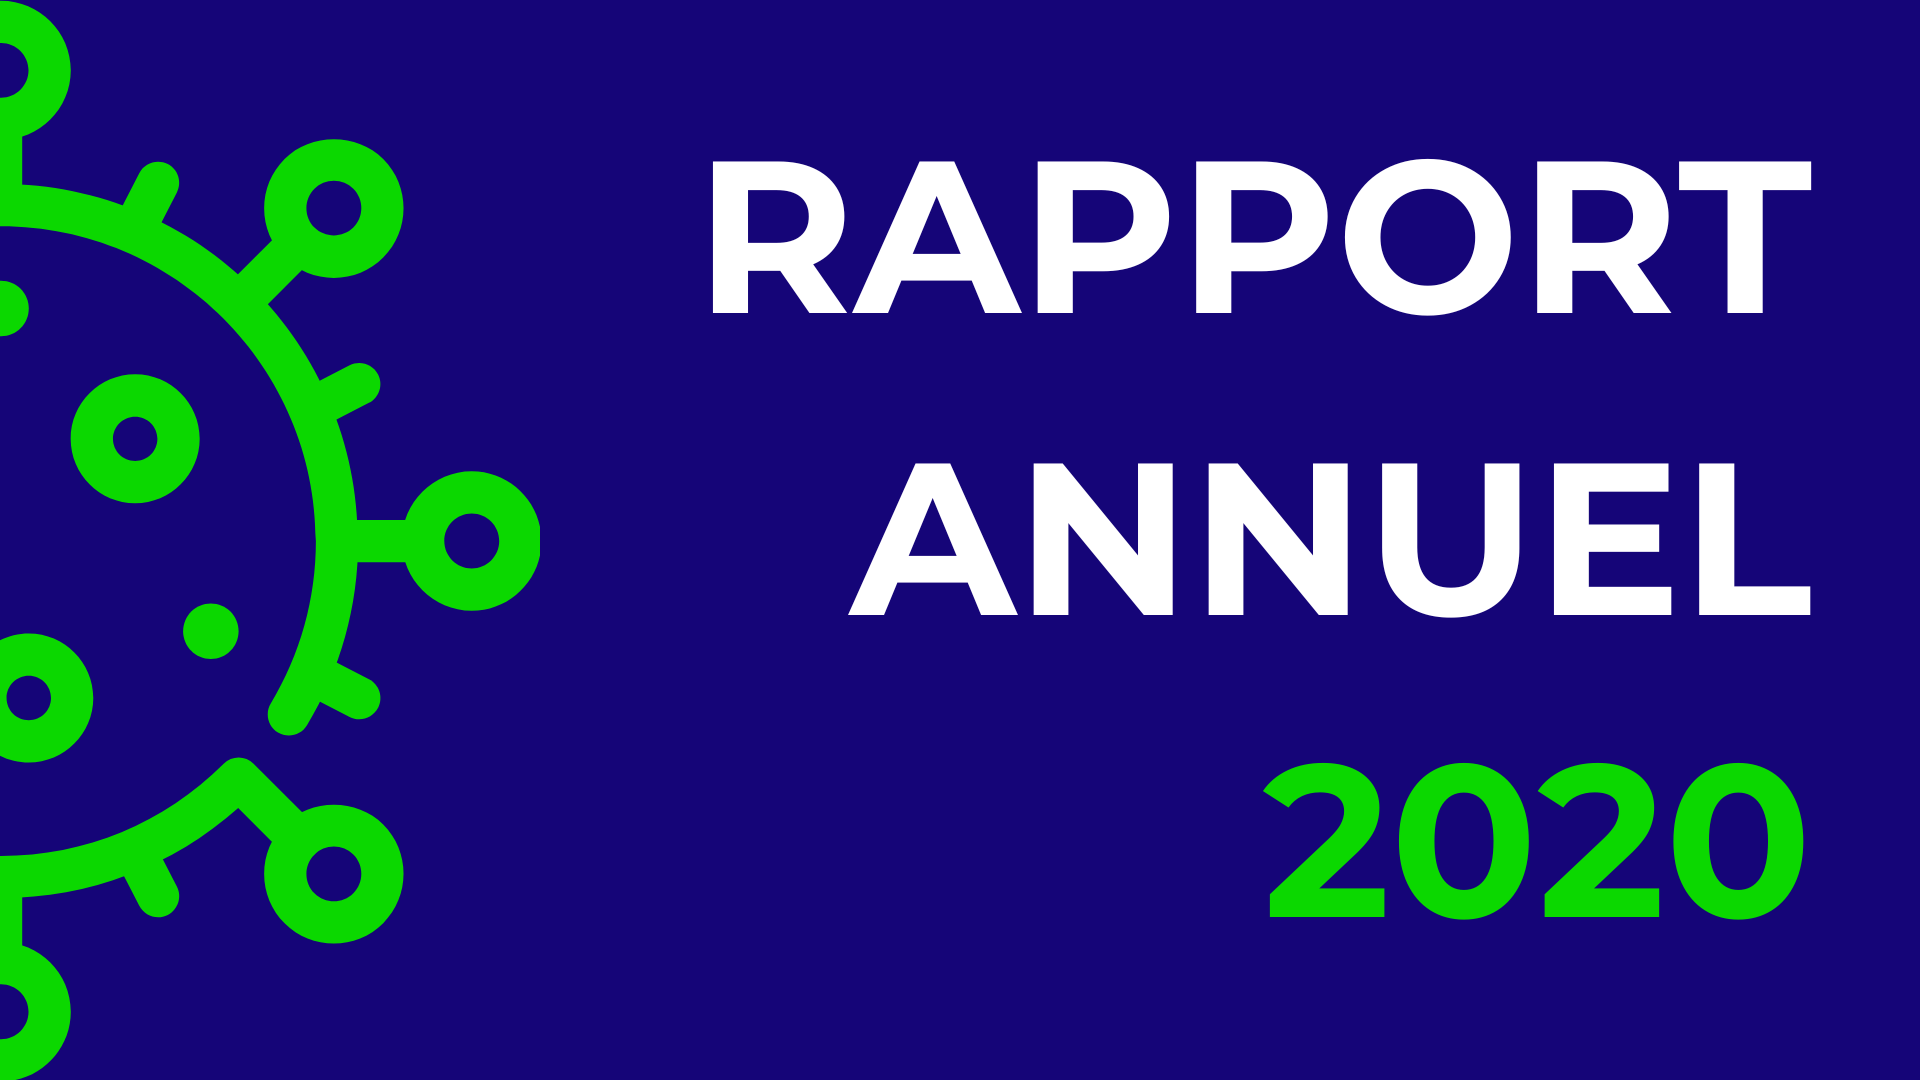 You are currently viewing Rapport annuel 2020 du SIAO 67‎ ‎ ‎ ‎ ‎ ‎ ‎ ‎ ‎ ‎ ‎ ‎ ‎ ‎ ‎ ‎ ‎ ‎ ‎ ‎ ‎ ‎ ‎ ‎ ‎ ‎ ‎‎ ‎